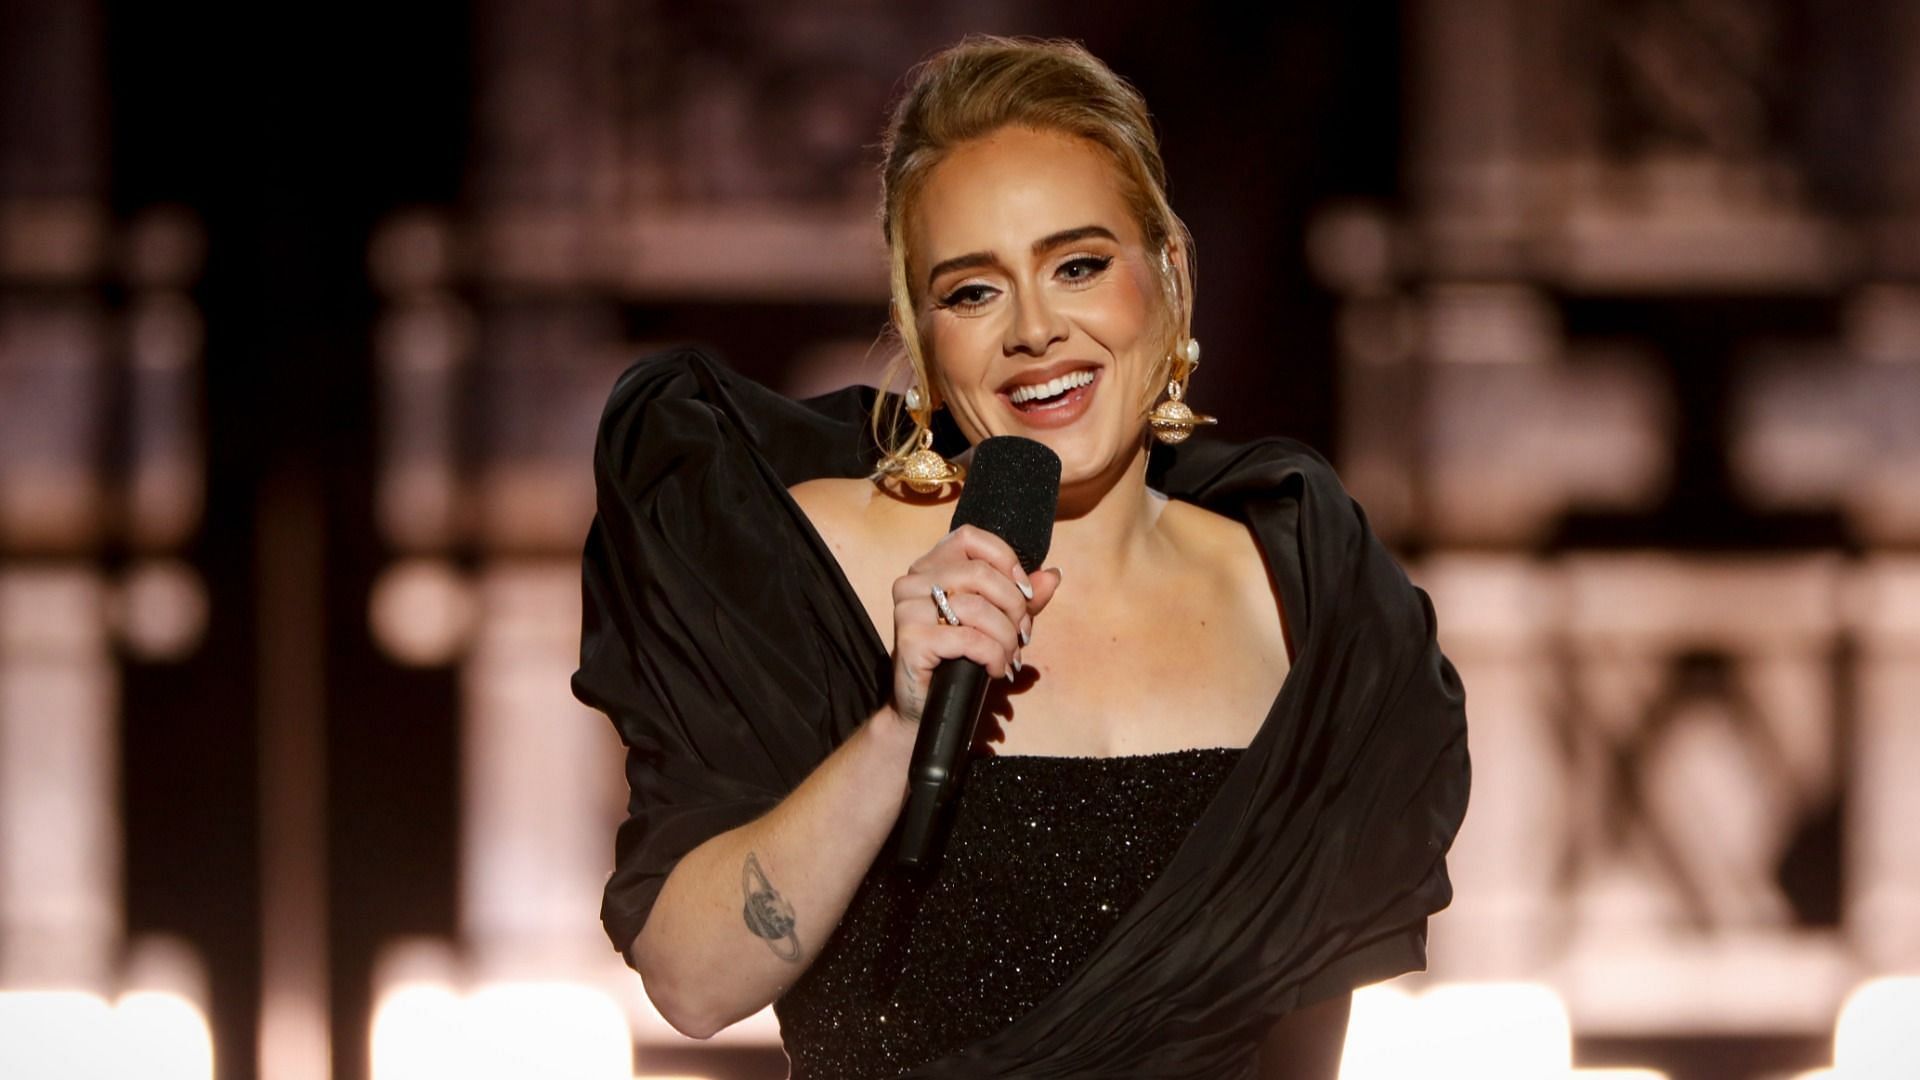 Adele surprised her fans in London after she stripped down and performed a pole dance amidst an ongoing contest (Image via Getty Images/ Cliff Lipson)